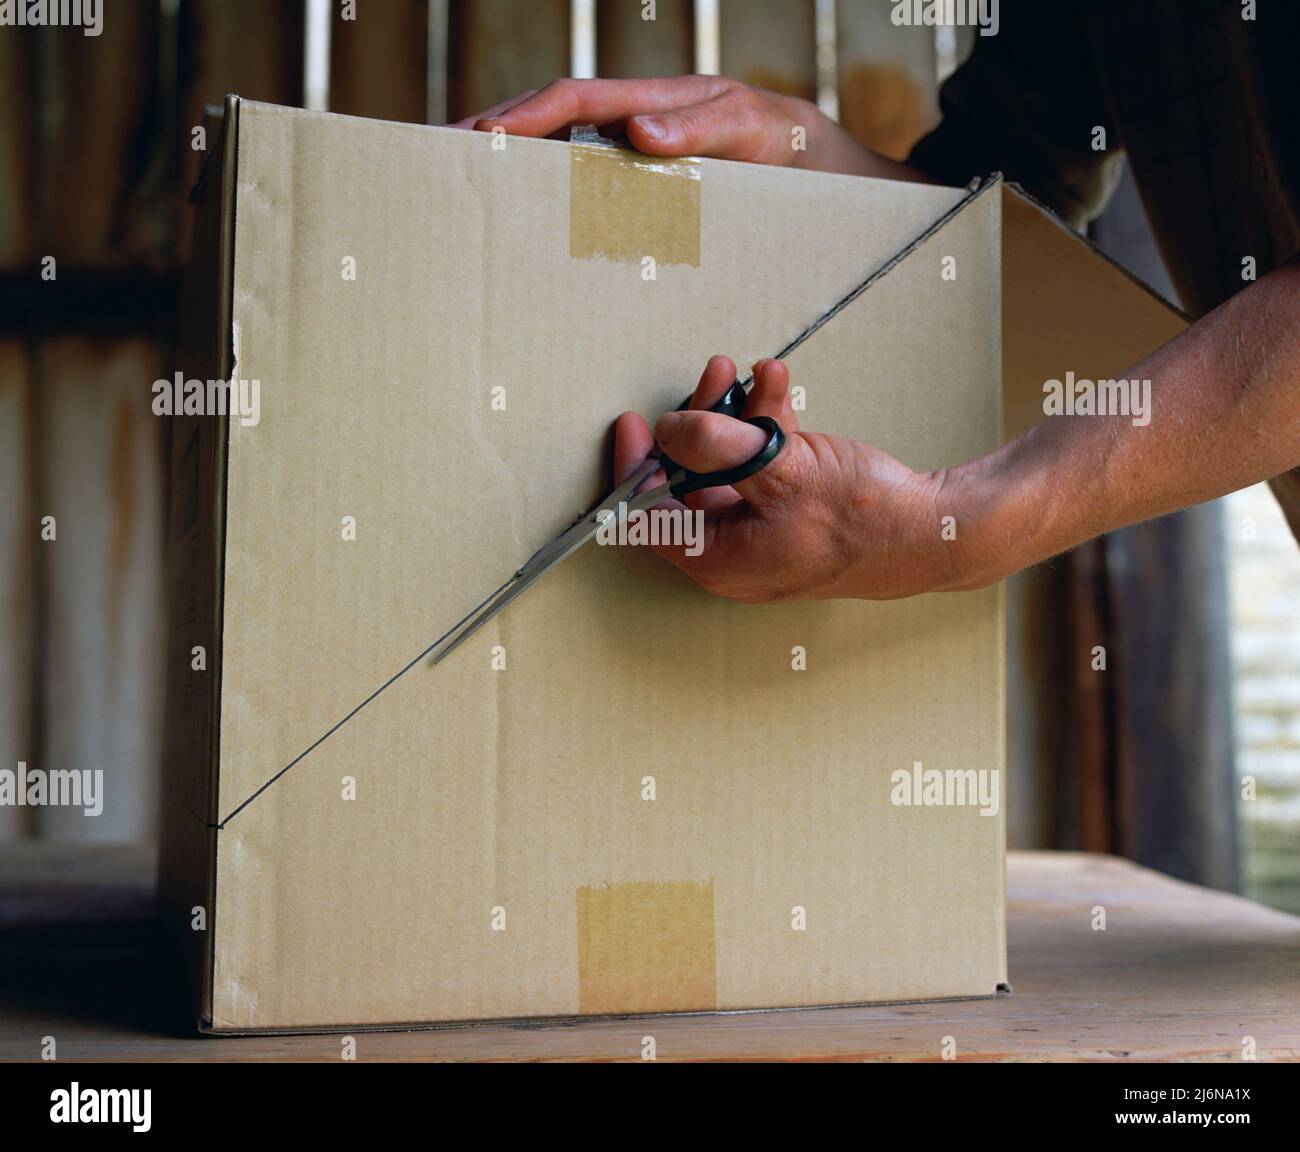 Using a pair of scissors to cut through a diagonal line in the side of a cardboard box. Stock Photo